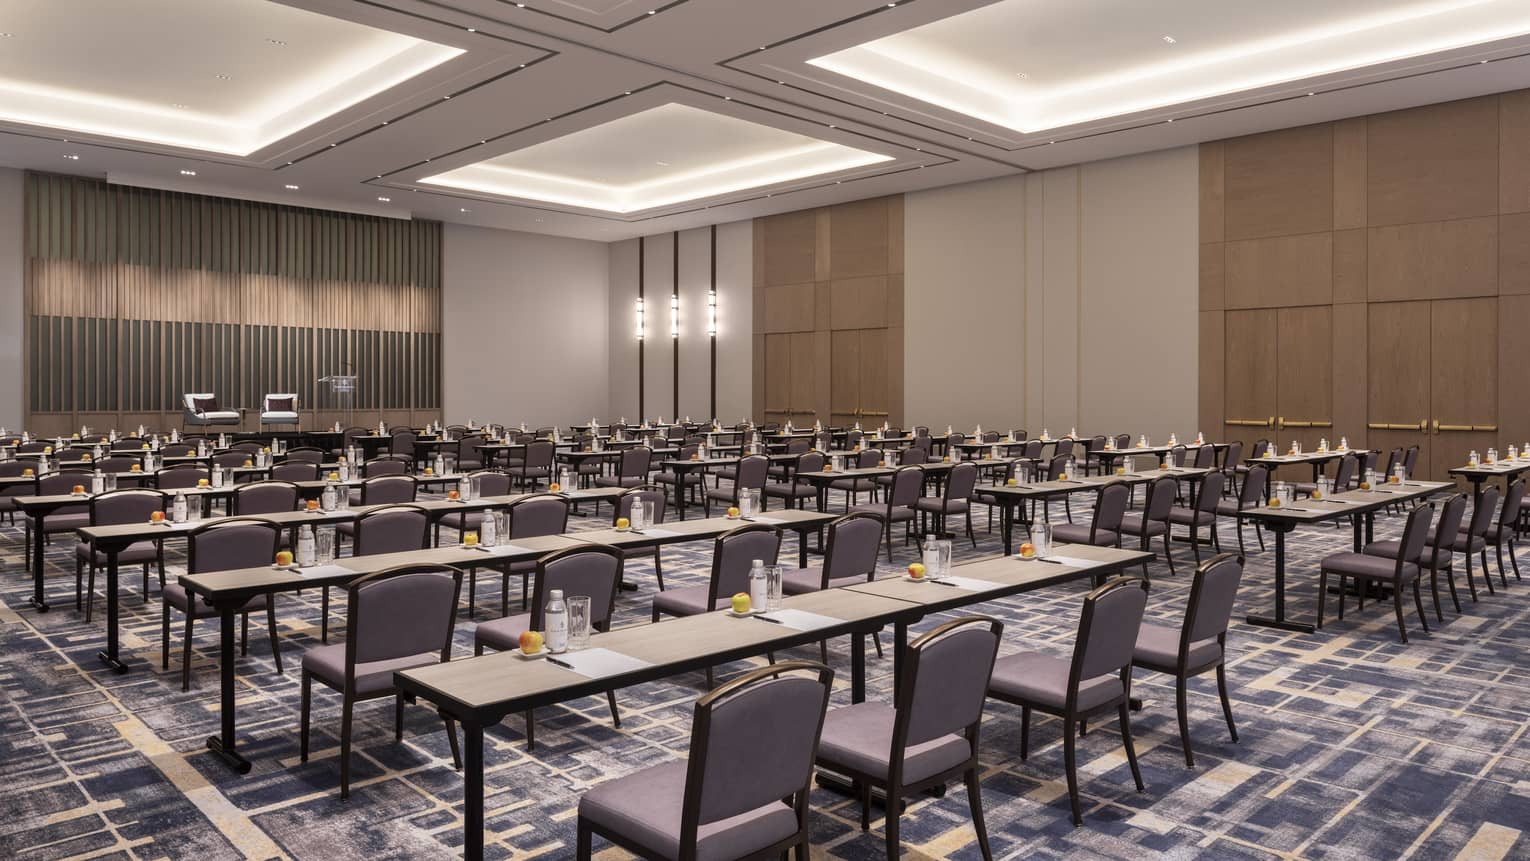 A large meeting room with longe tables and chairs facing a one side of the space.